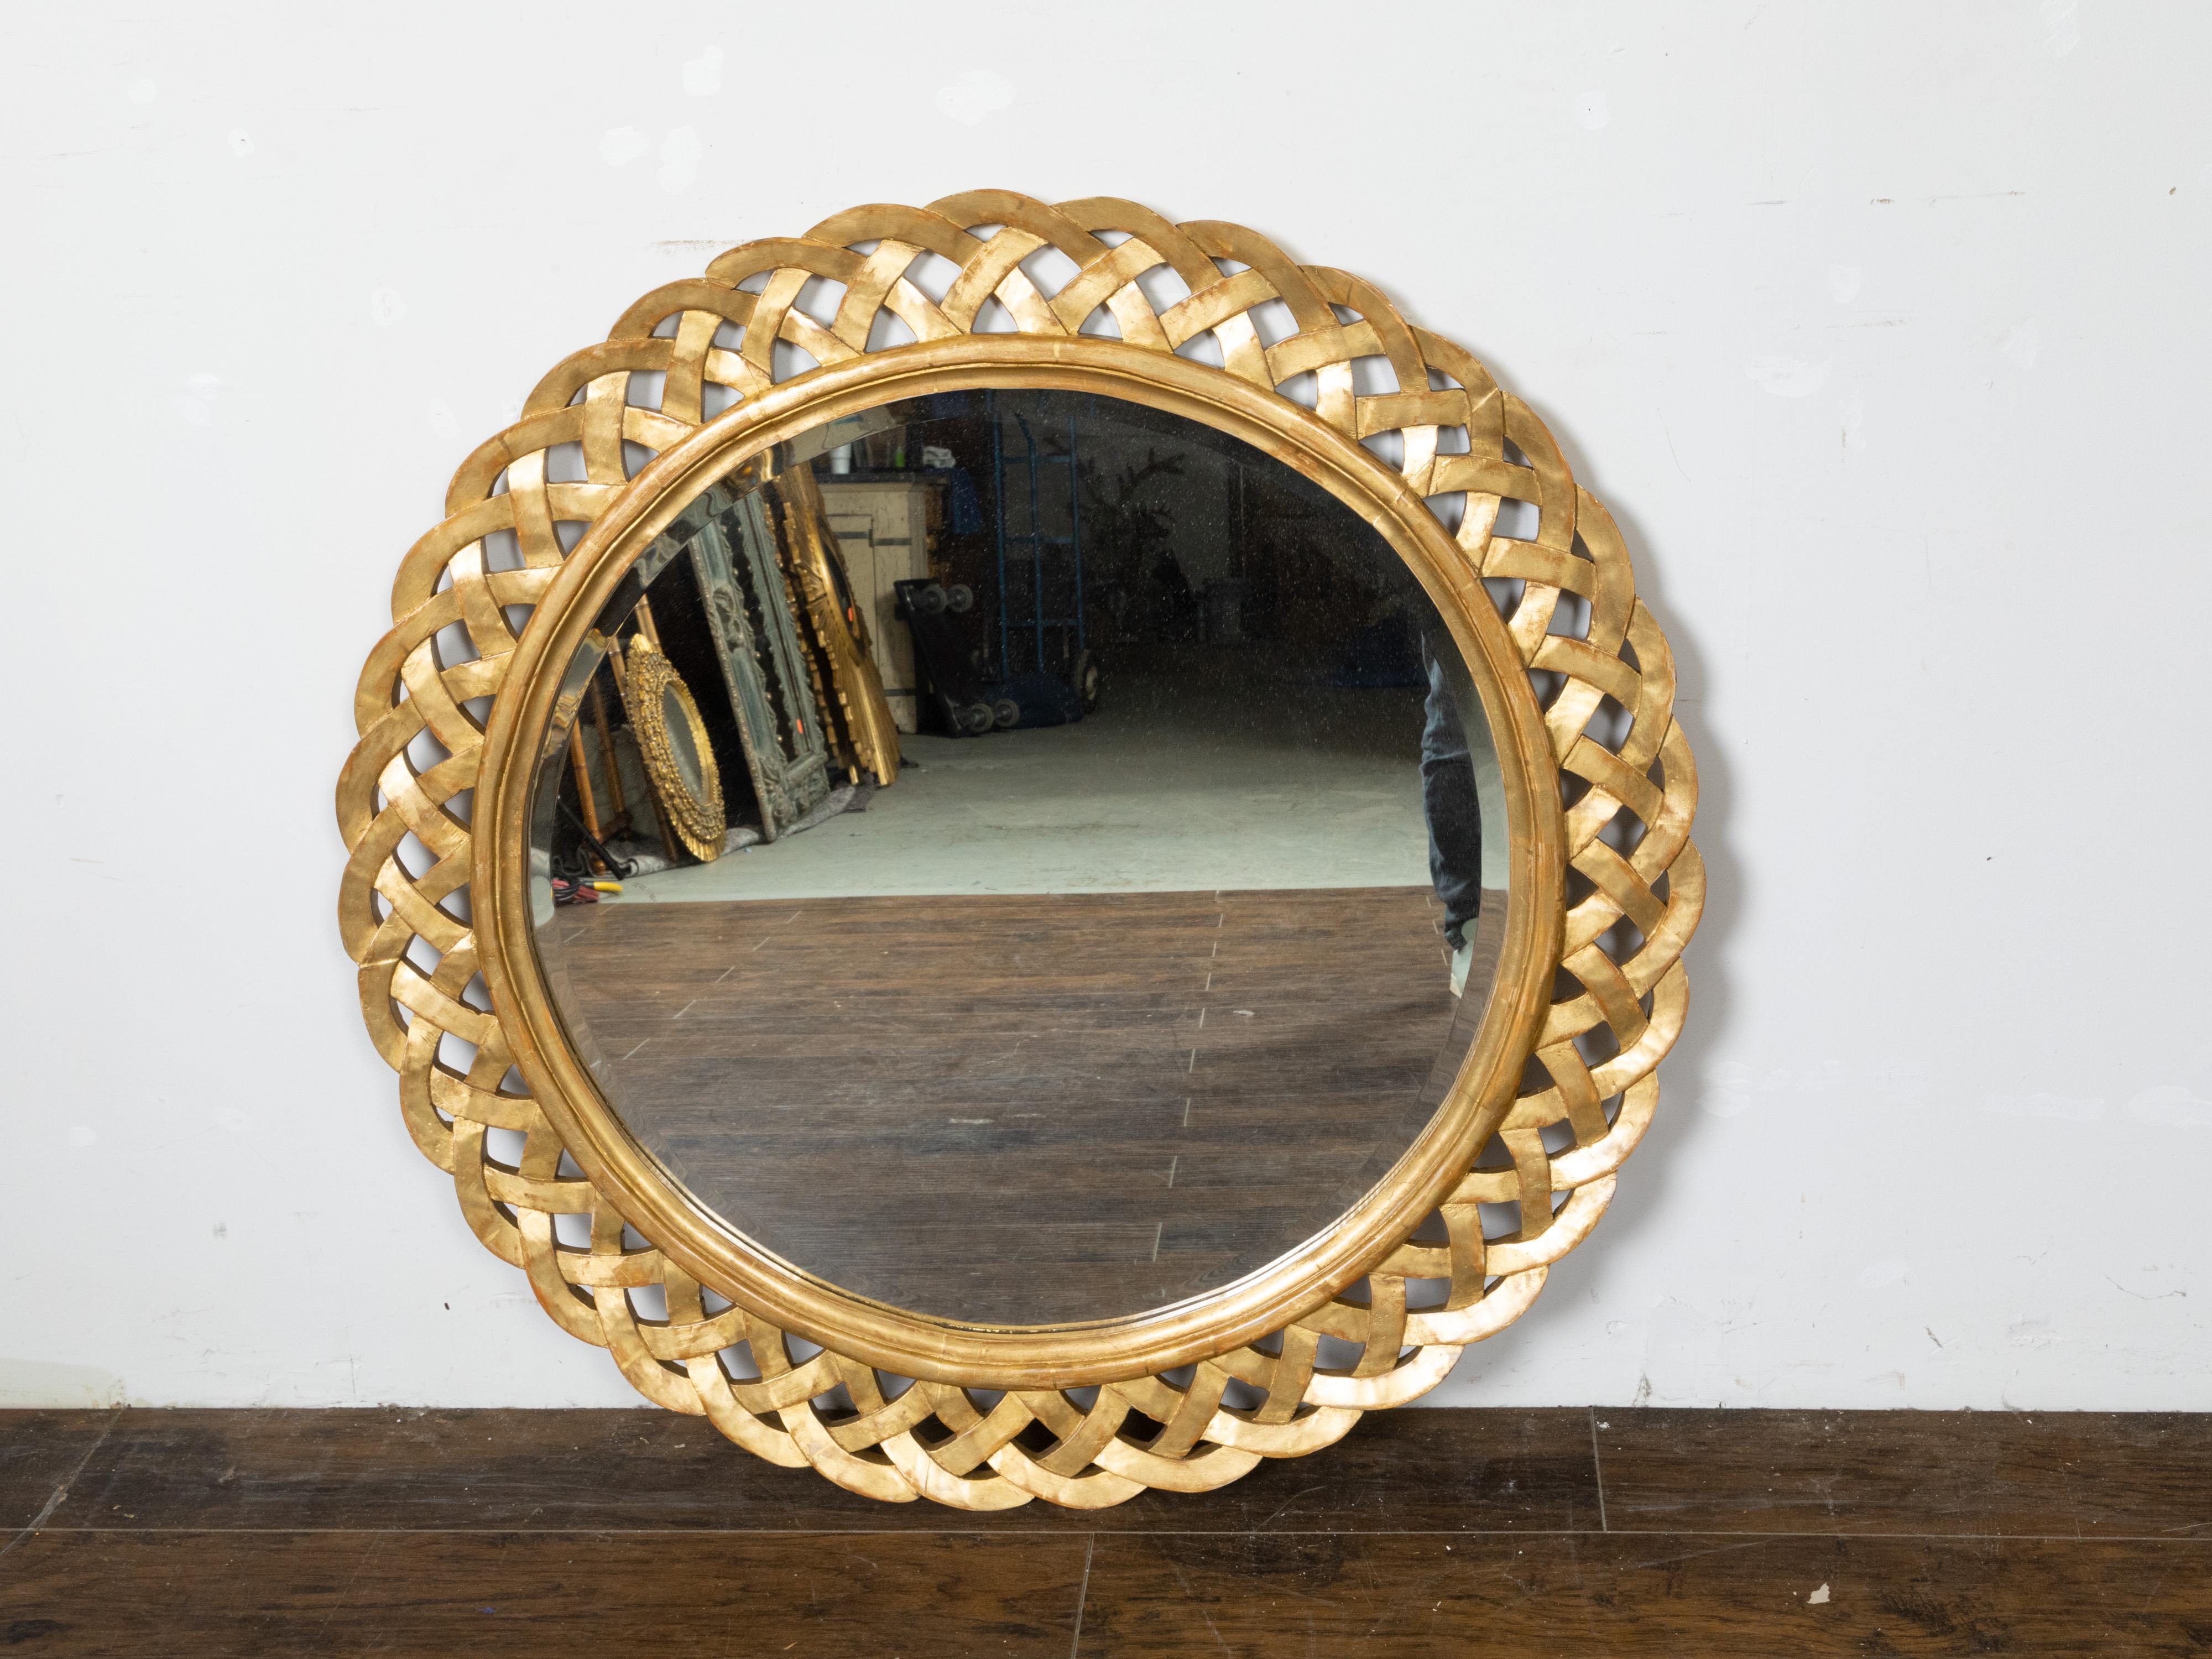 A French giltwood circular mirror from the 19th century, with woven trellis inspired frame and beveled mirror. Created in France during the 19th century, this giltwood piece features a round mirror plate with beveled accents, surrounded by a stylish